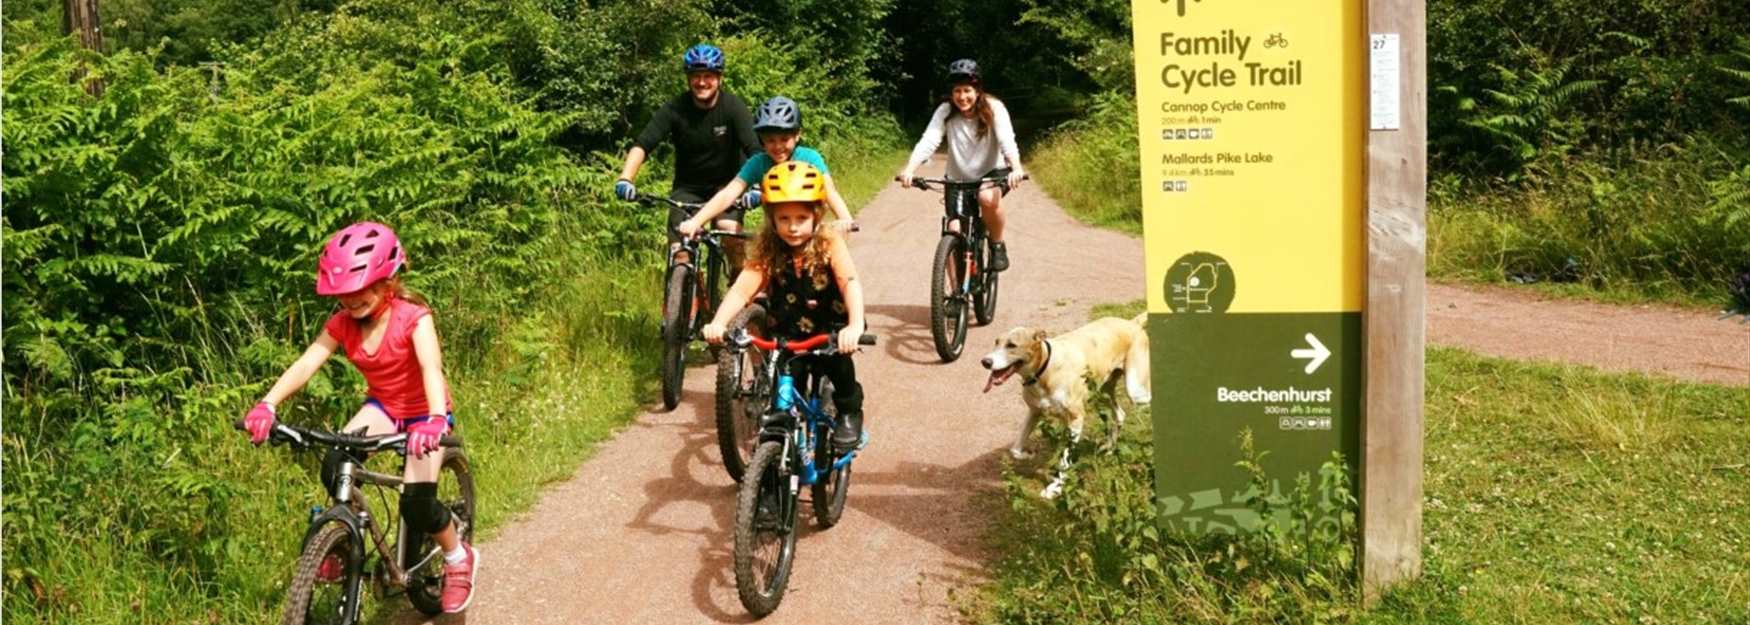 Family cycle trail in the Forest of Dean